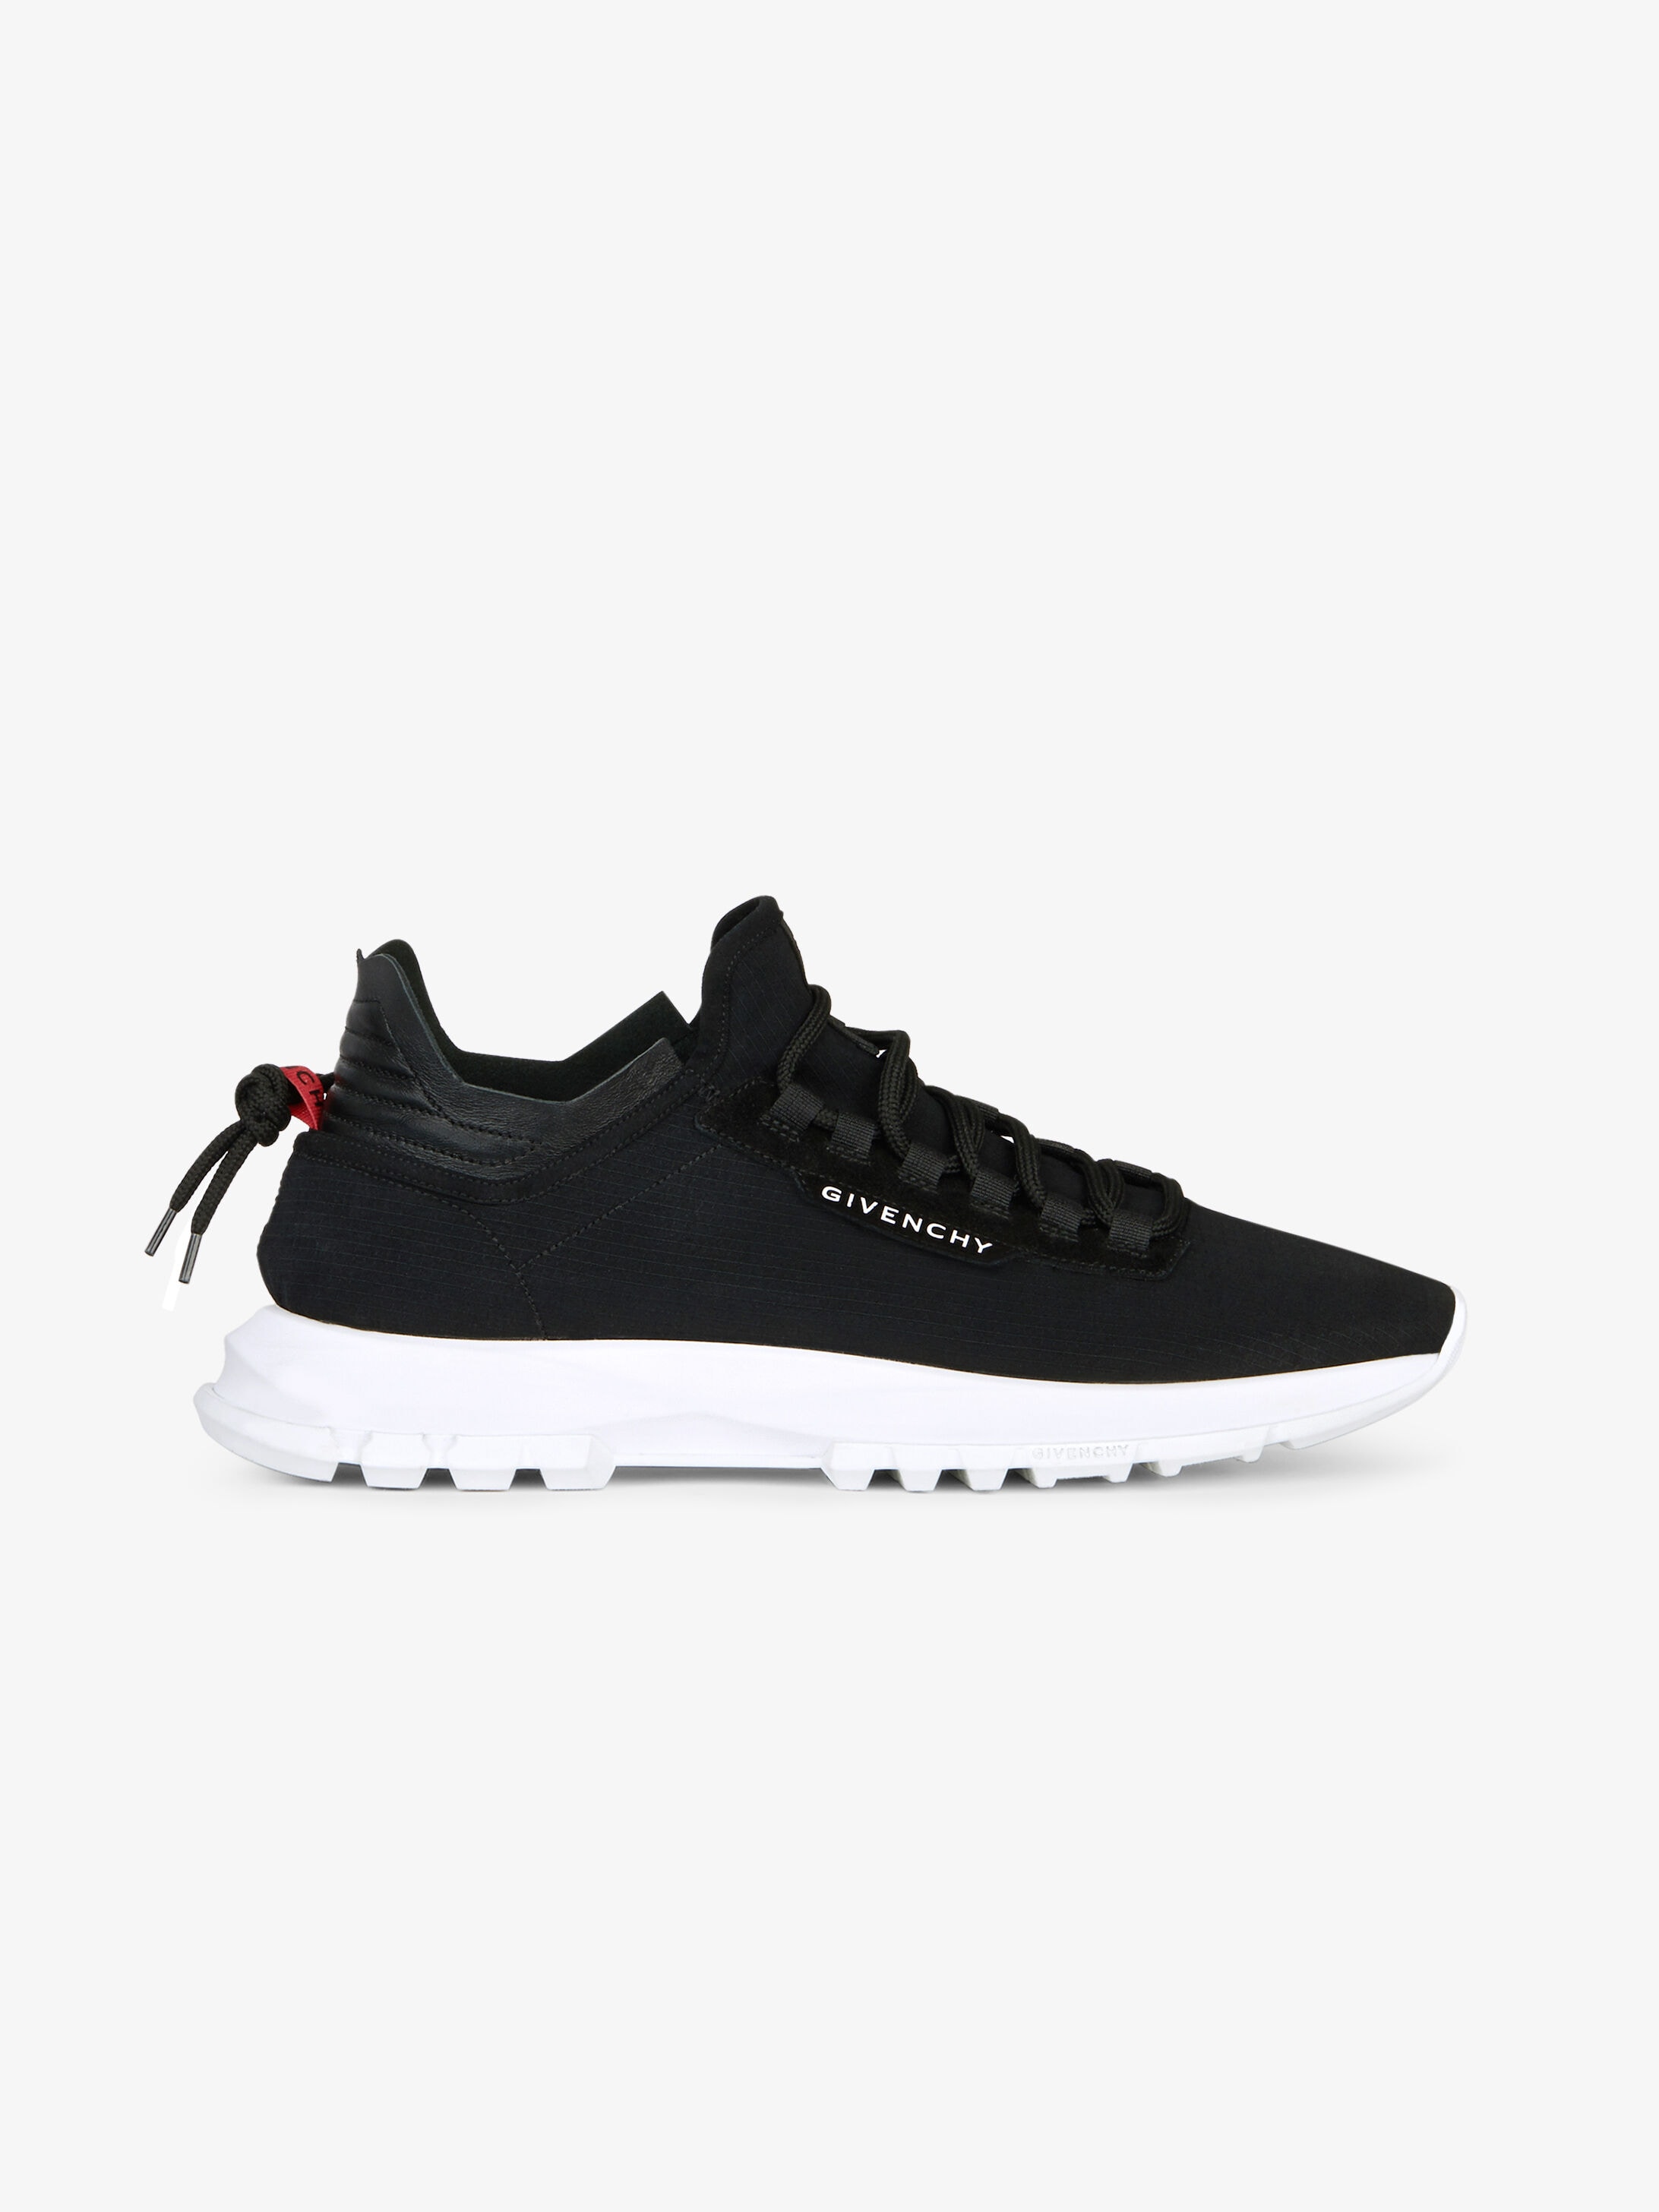 givenchy mens shoes sale